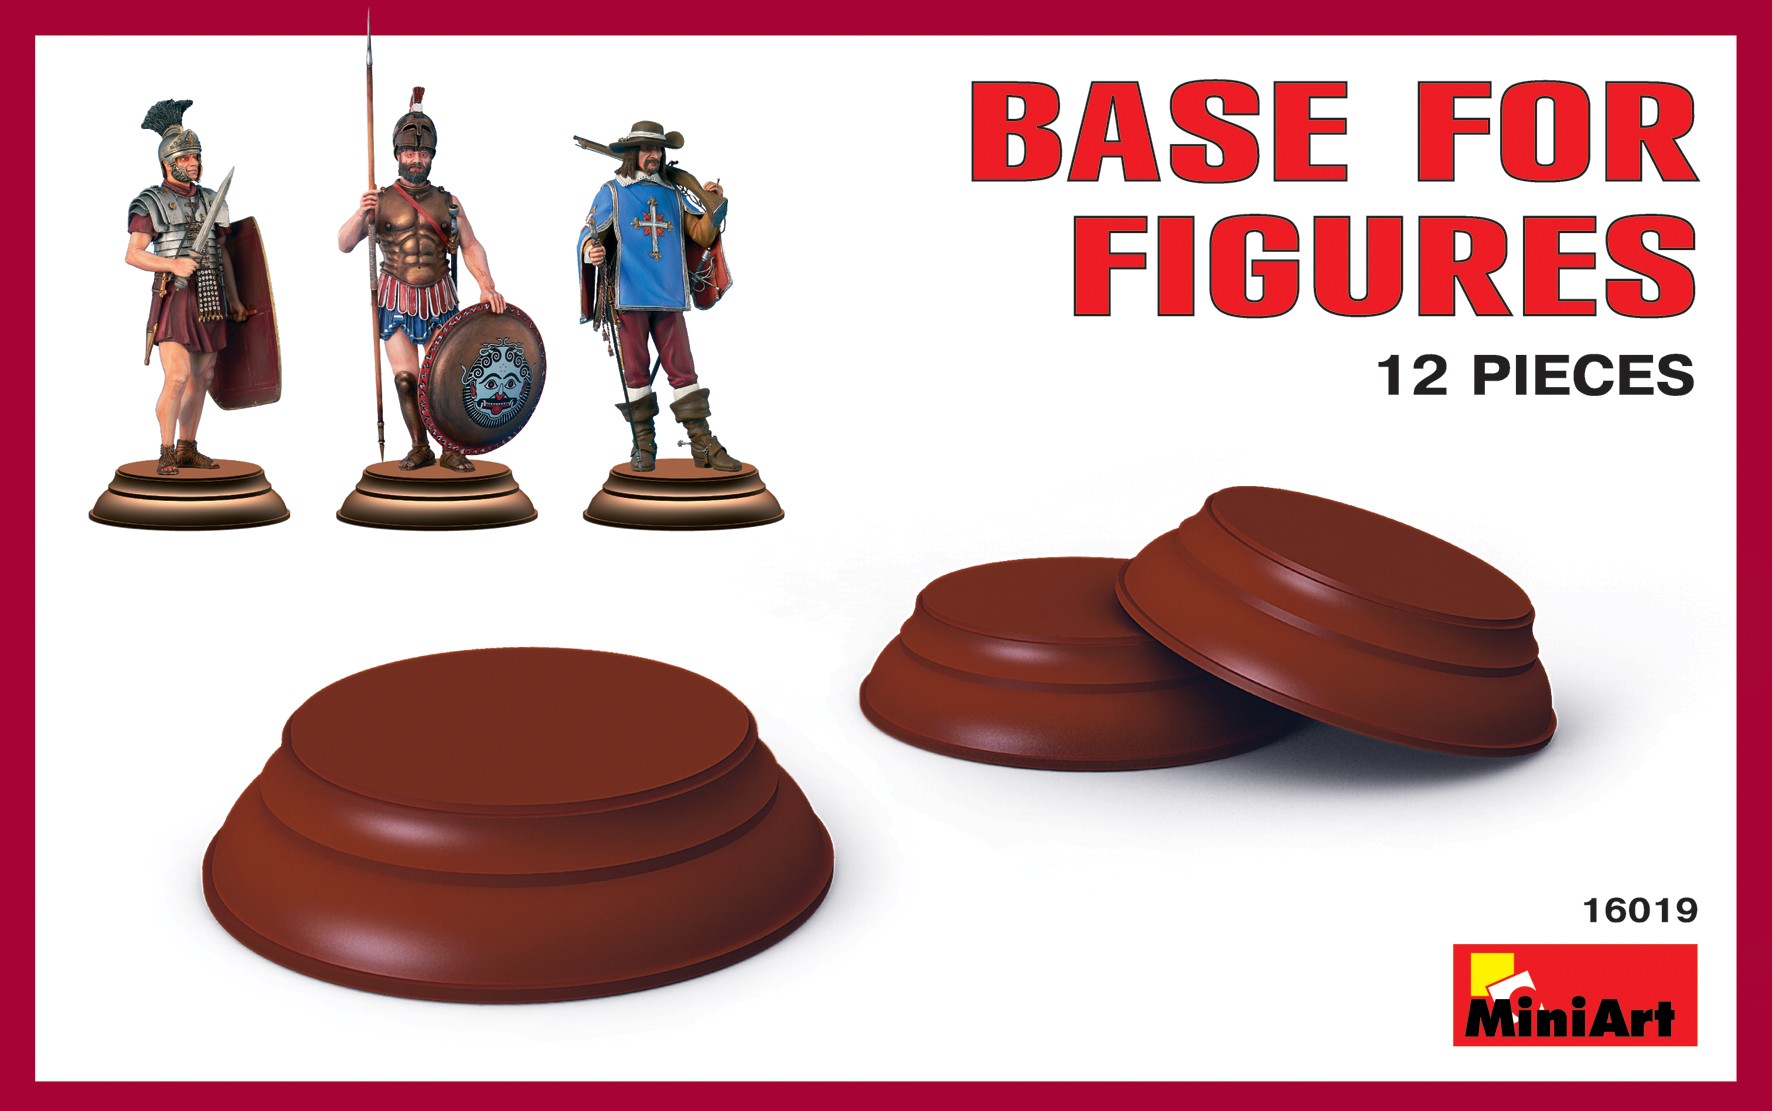 Bases for Figures (12pcs) by MiniArt